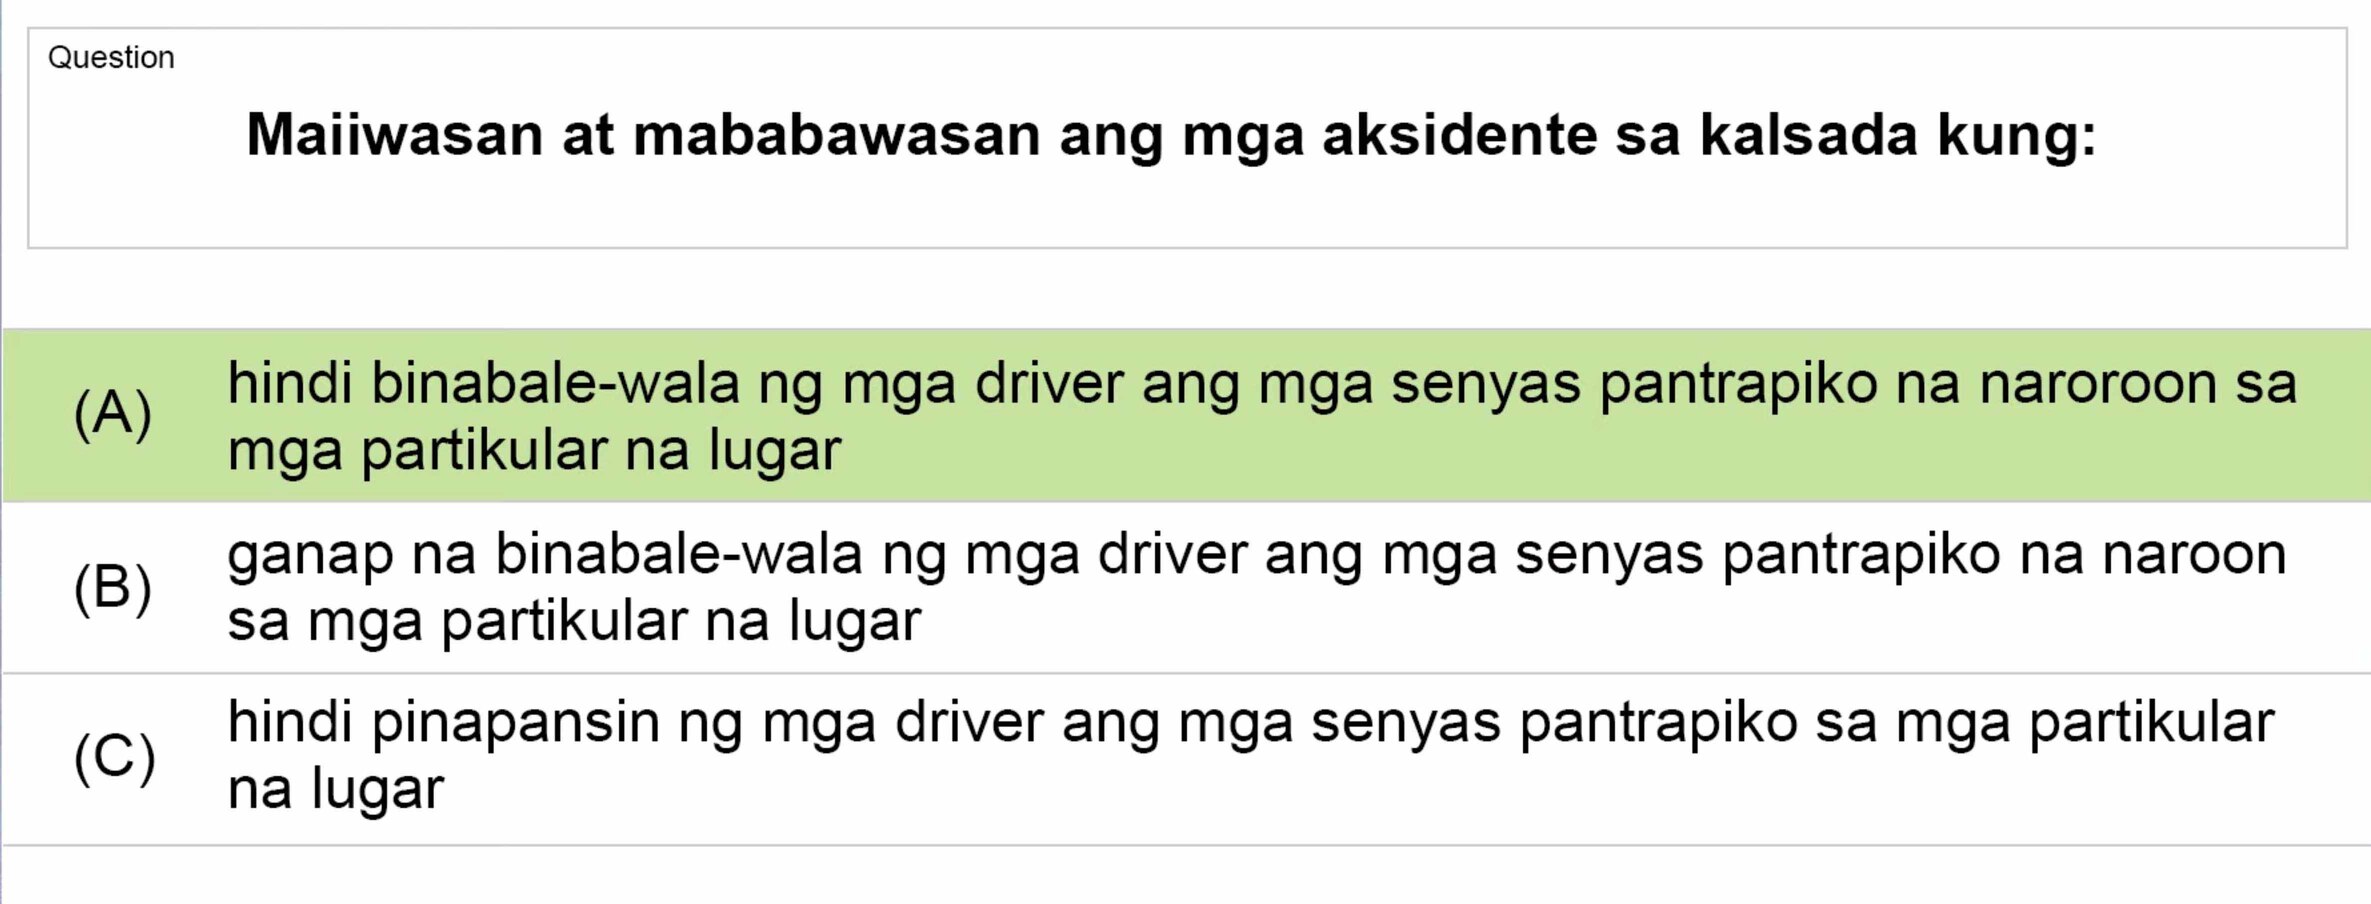 LTO Tagalog non professional exam reviewer motorcycle 1 (10)